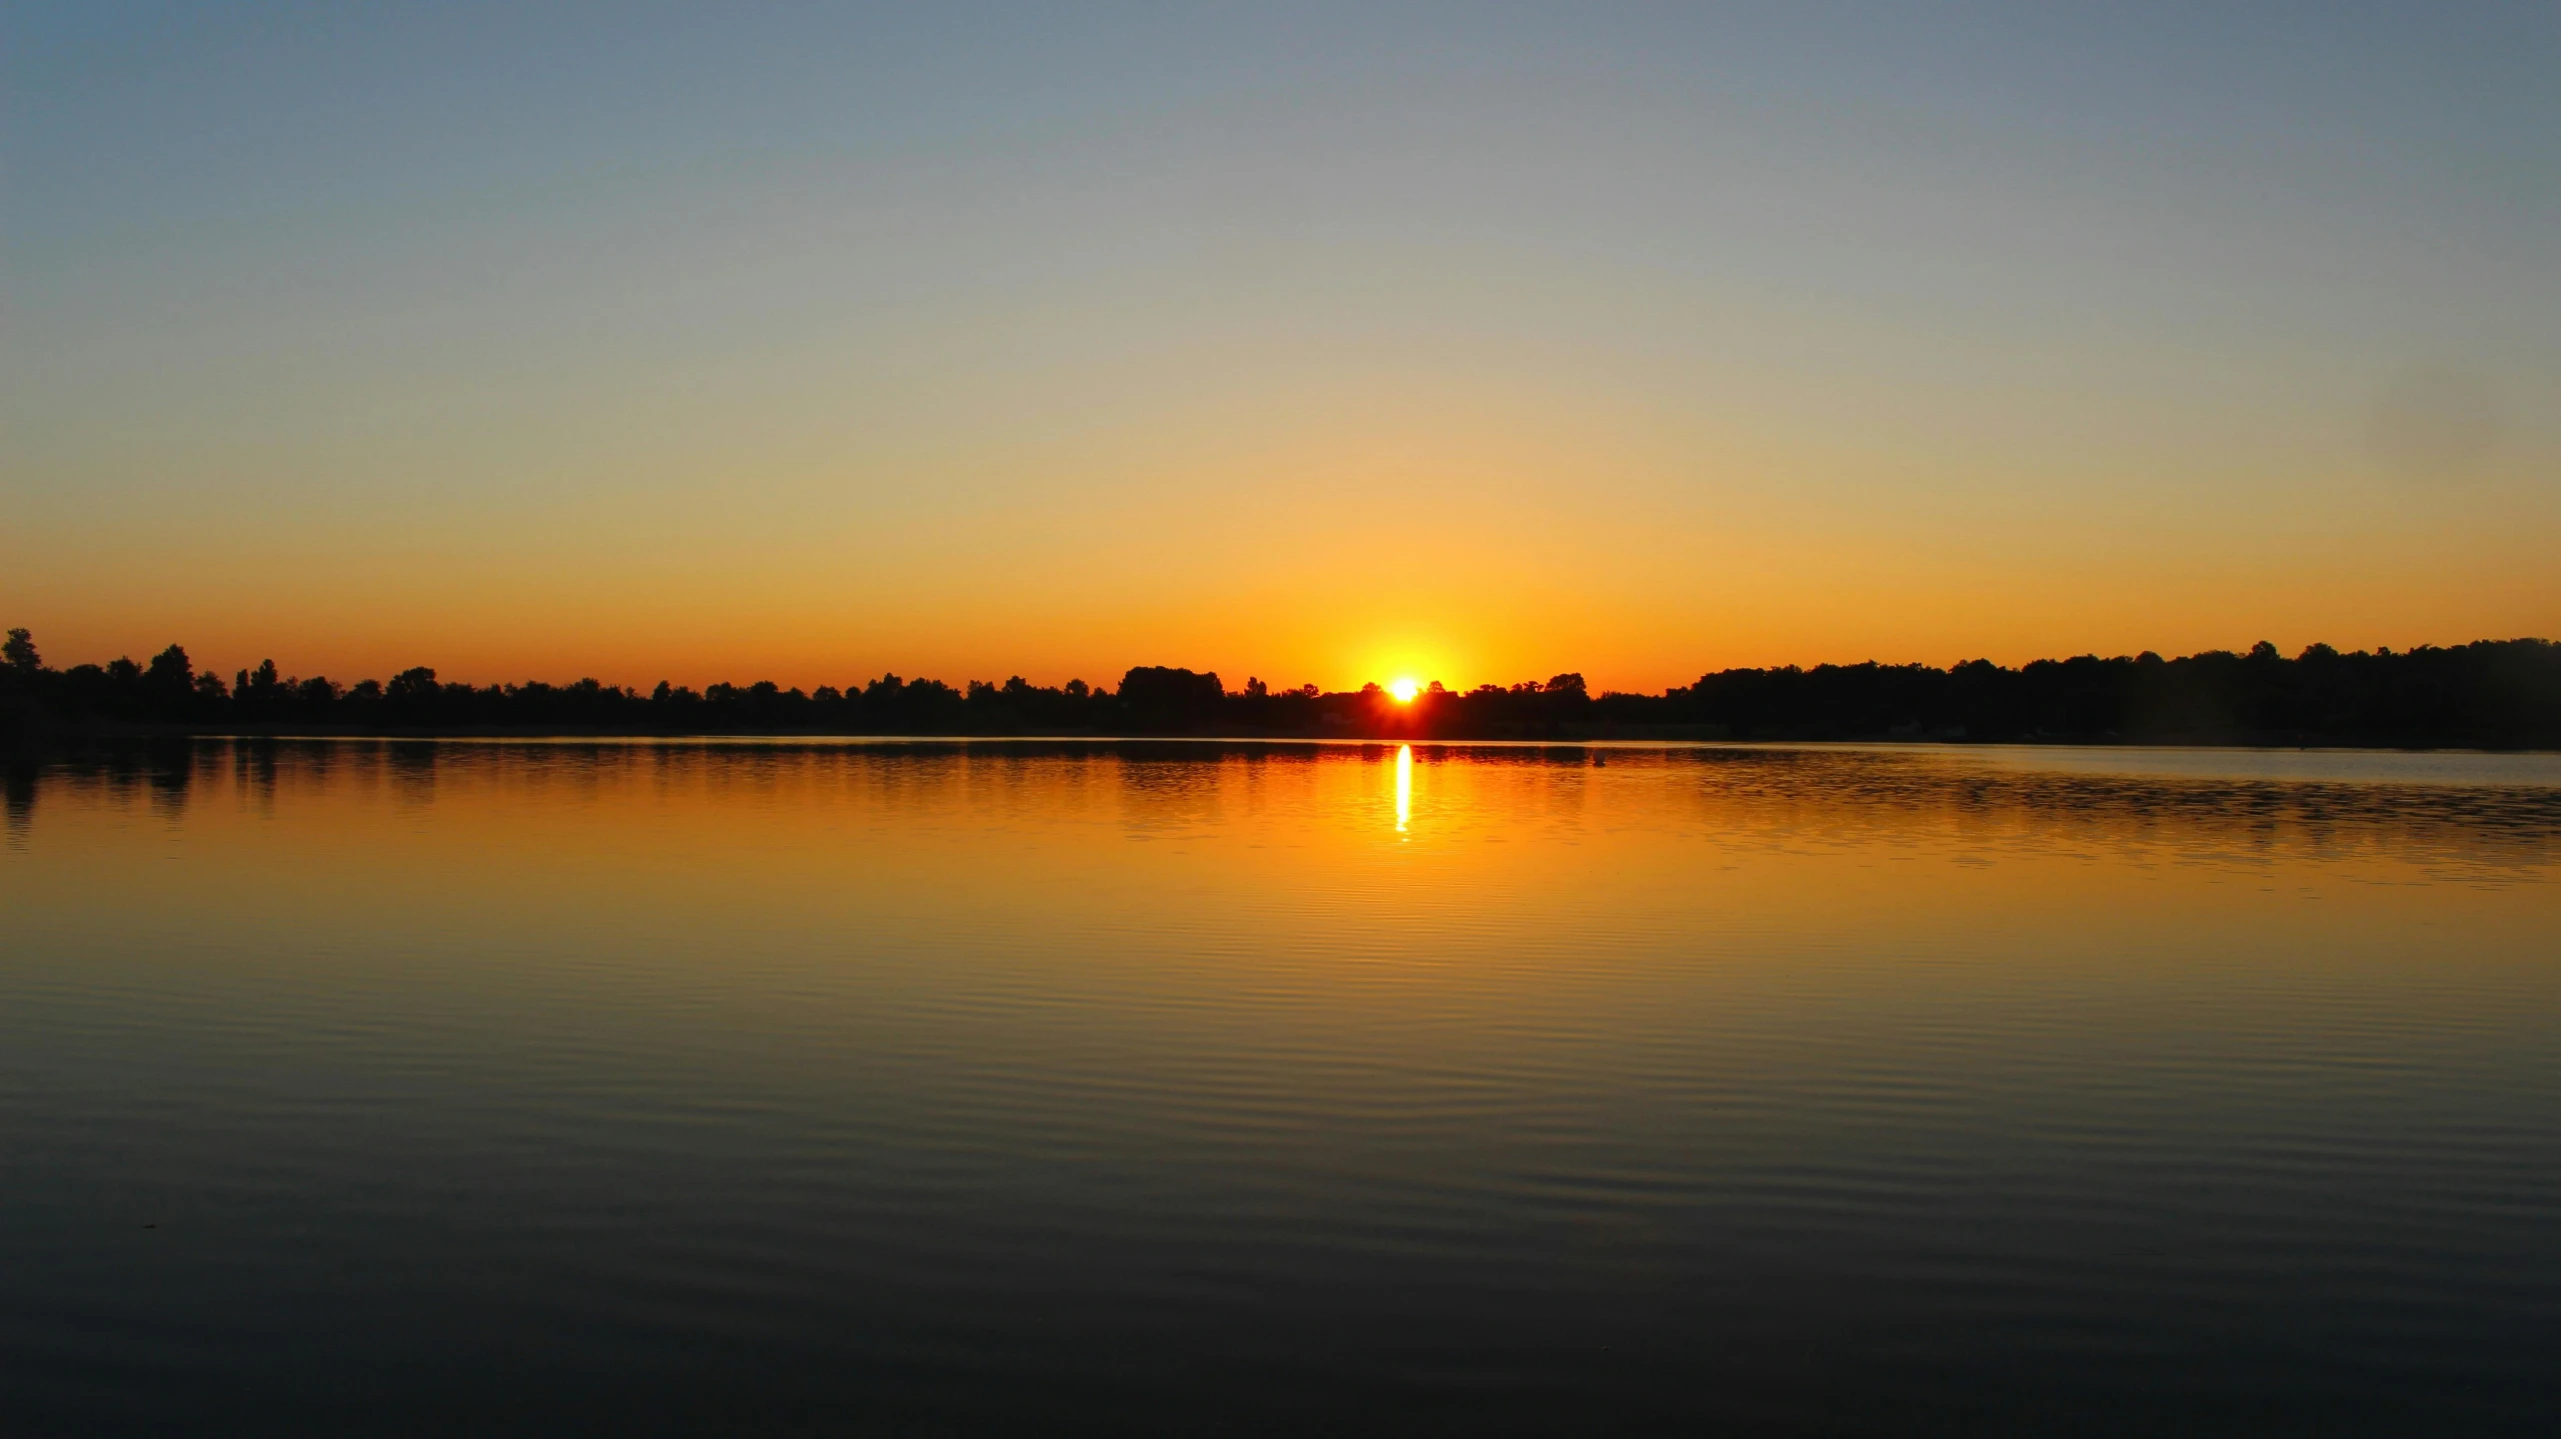 the sun is setting over a body of water, on a lake, no cropping, landscape photo, fan favorite